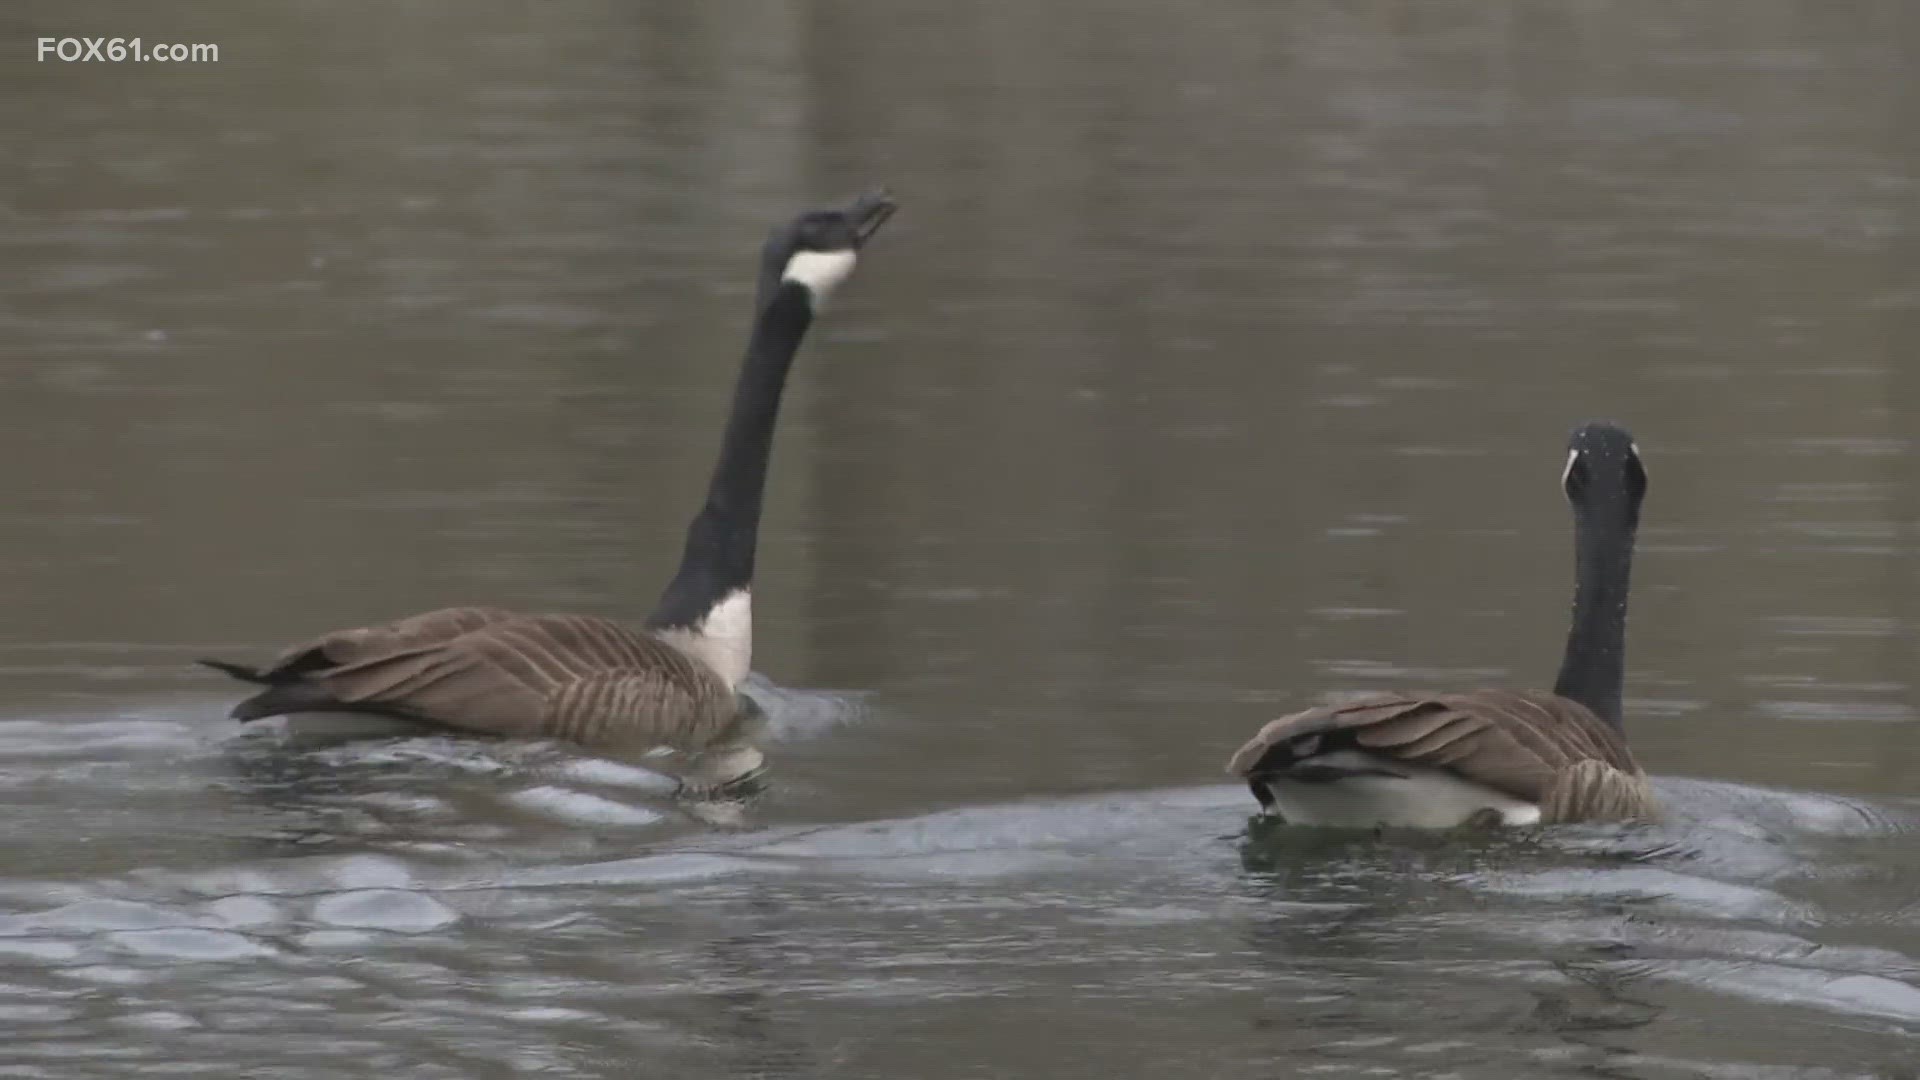 Matt Caron reports these geese may be grazing their final days before getting gassed, as complaints about their droppings have reached top city and state officials.